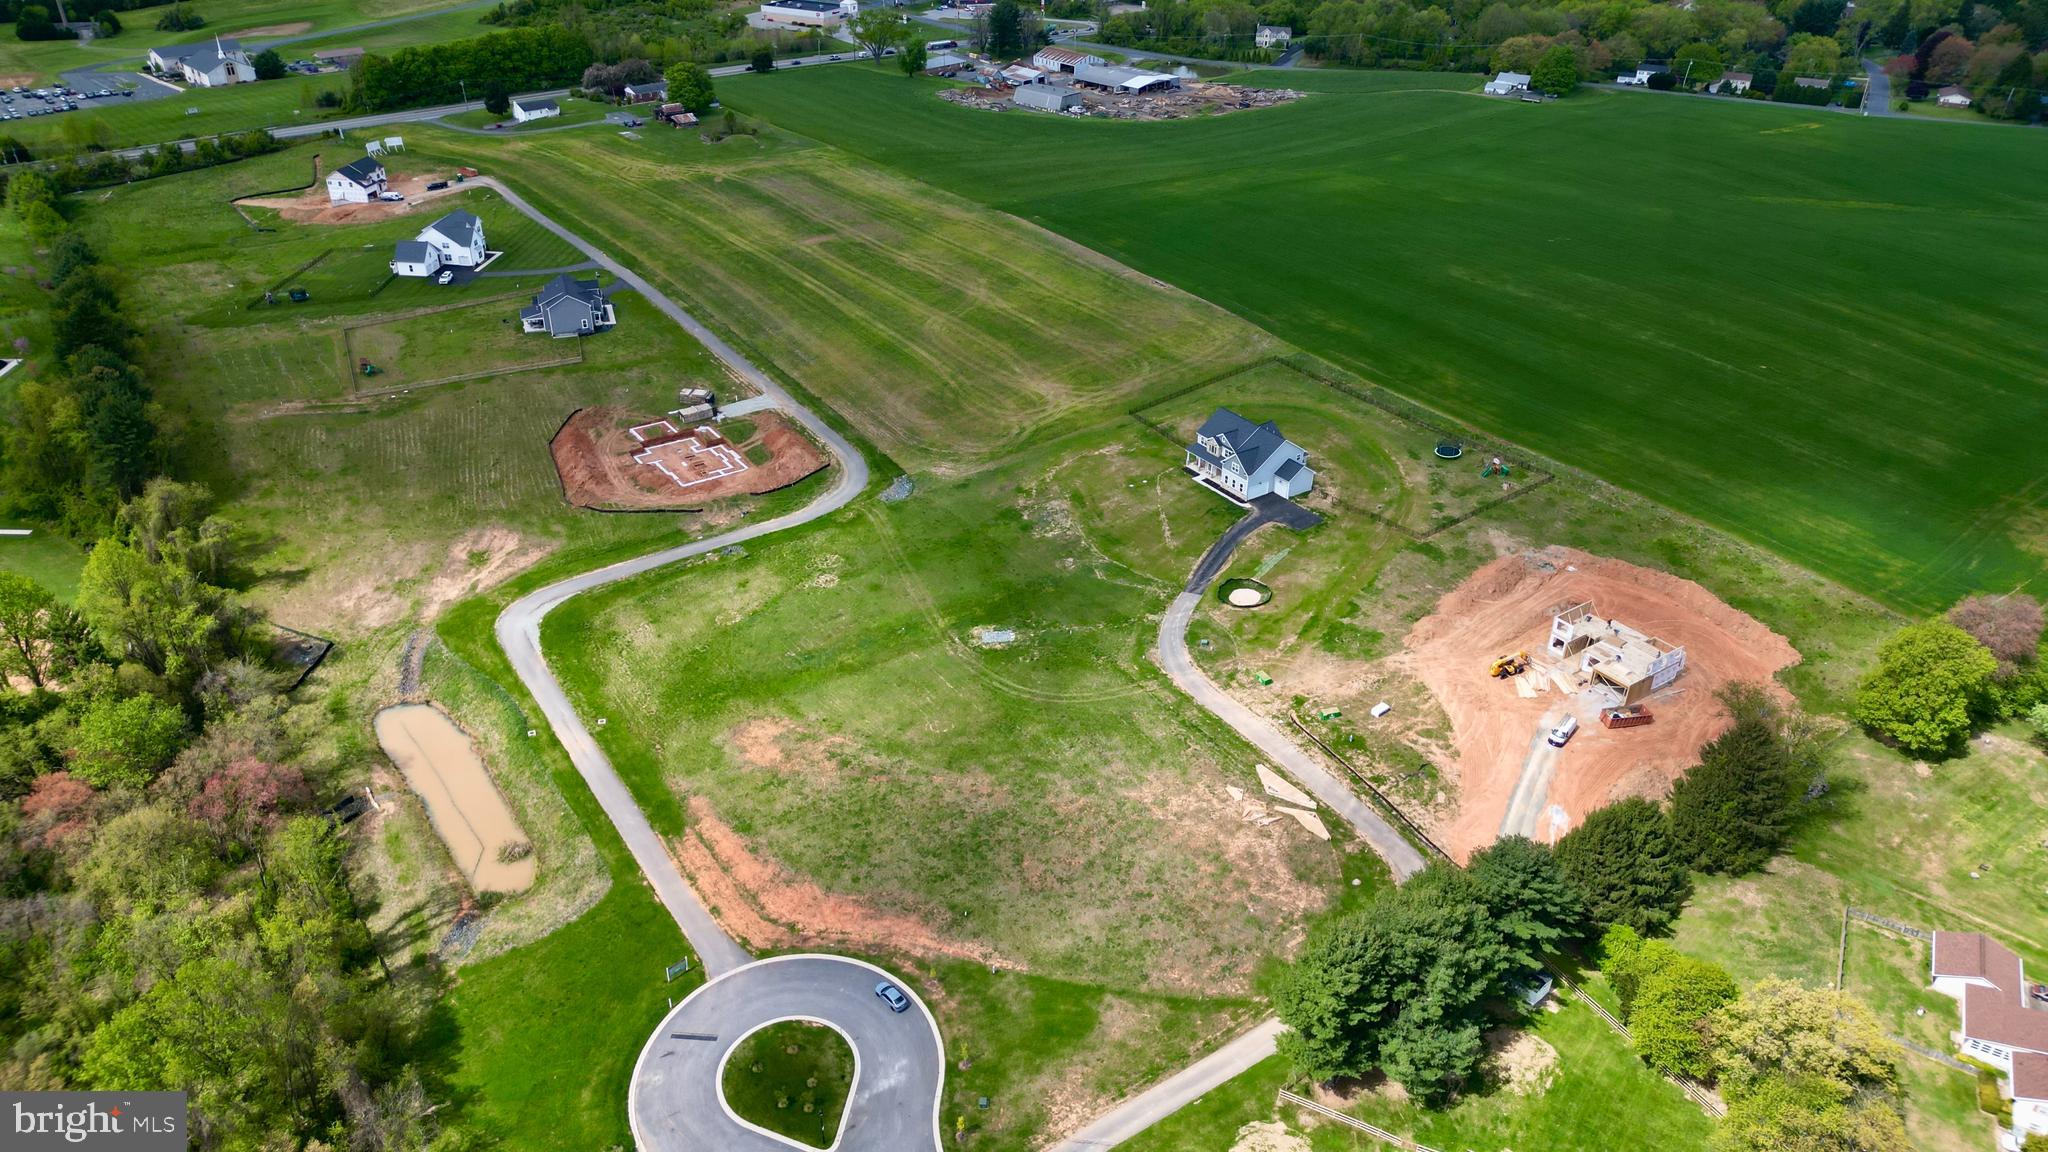 an aerial view of a play ground and trees all around